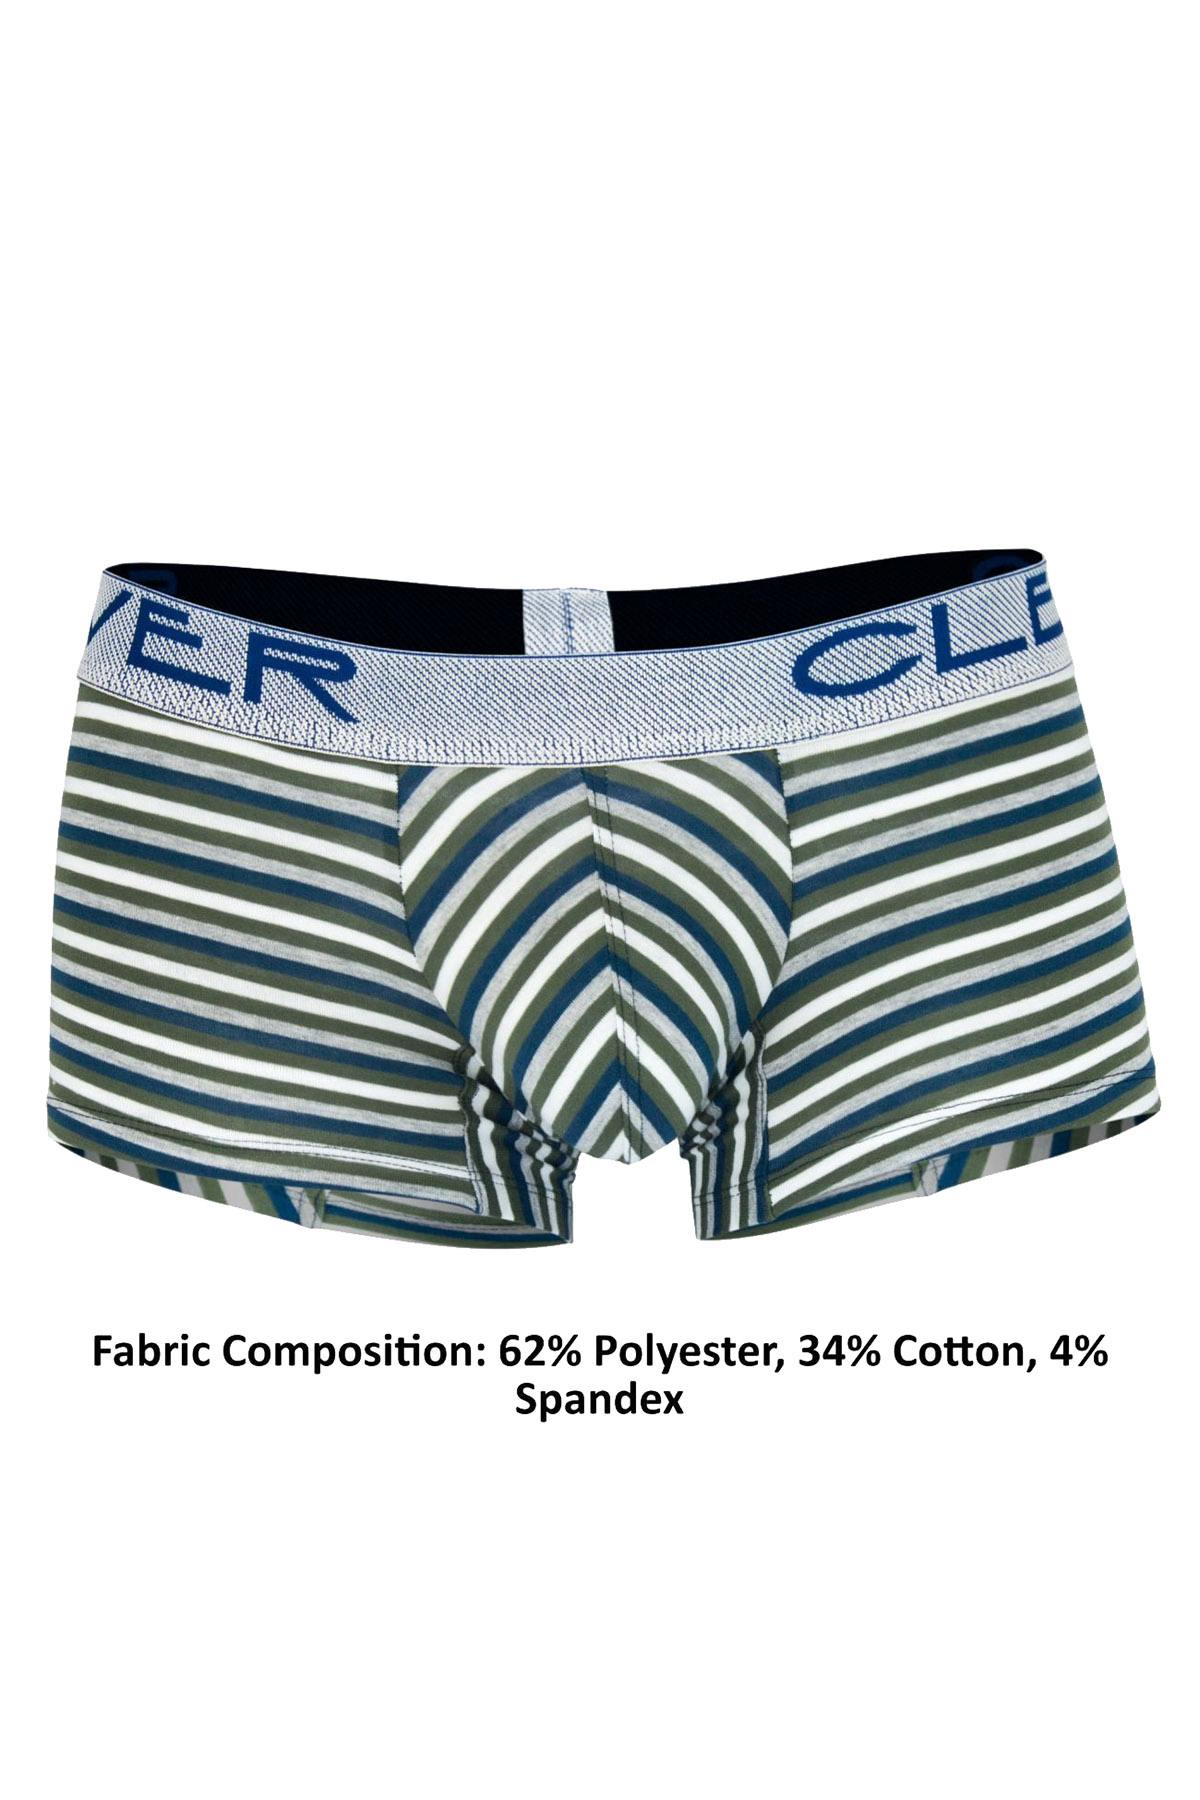 Clever Olive/Blue Stripe Limited Edition Trunk